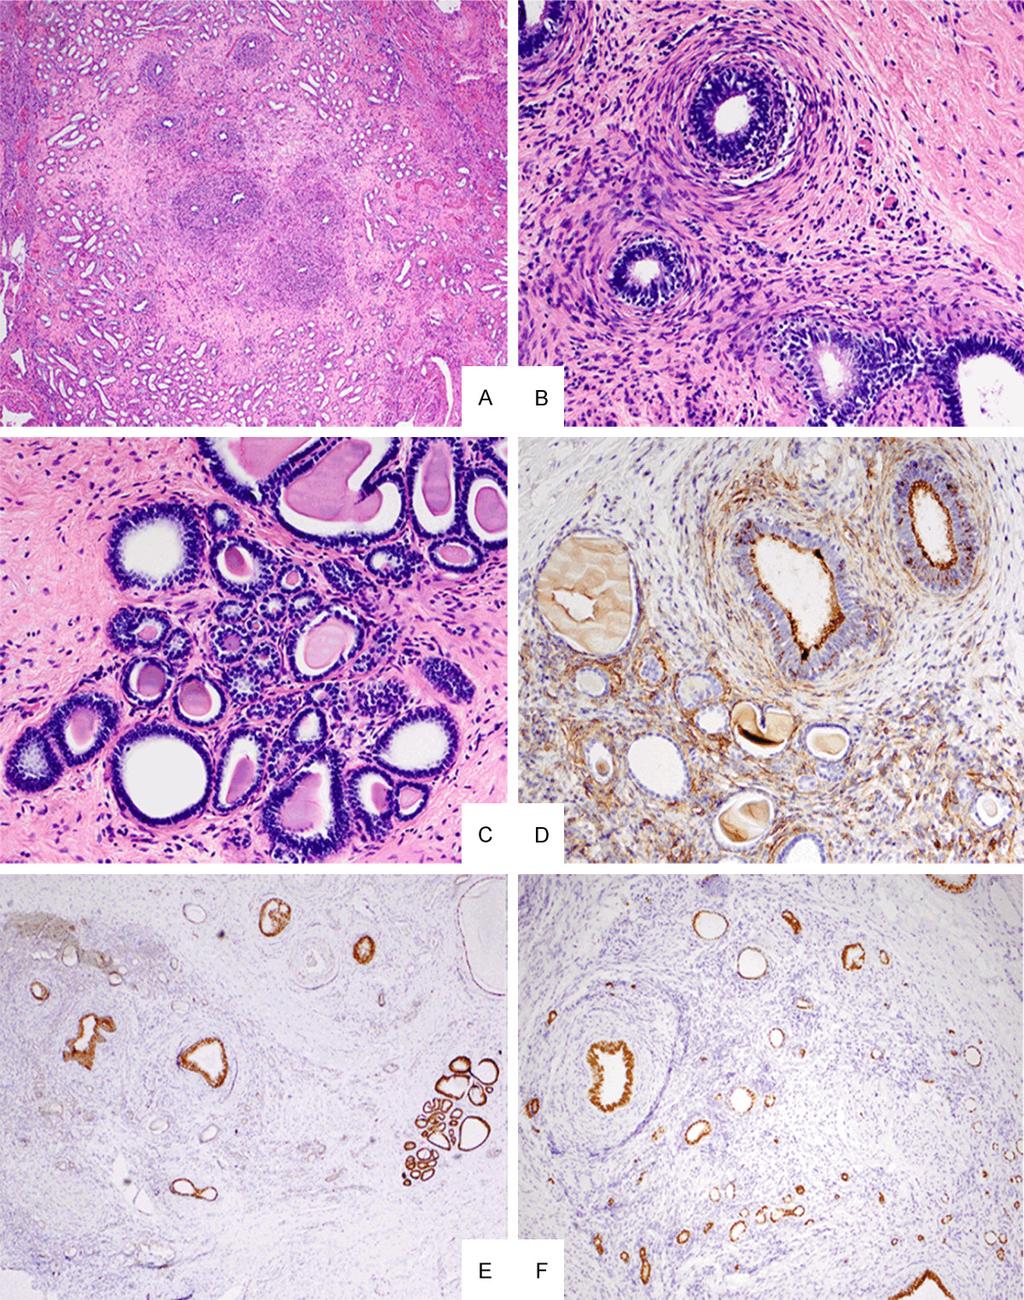 Figure 1. A. Mesonephric remnants are organized in a lobular pattern and located in renal medulla. B.